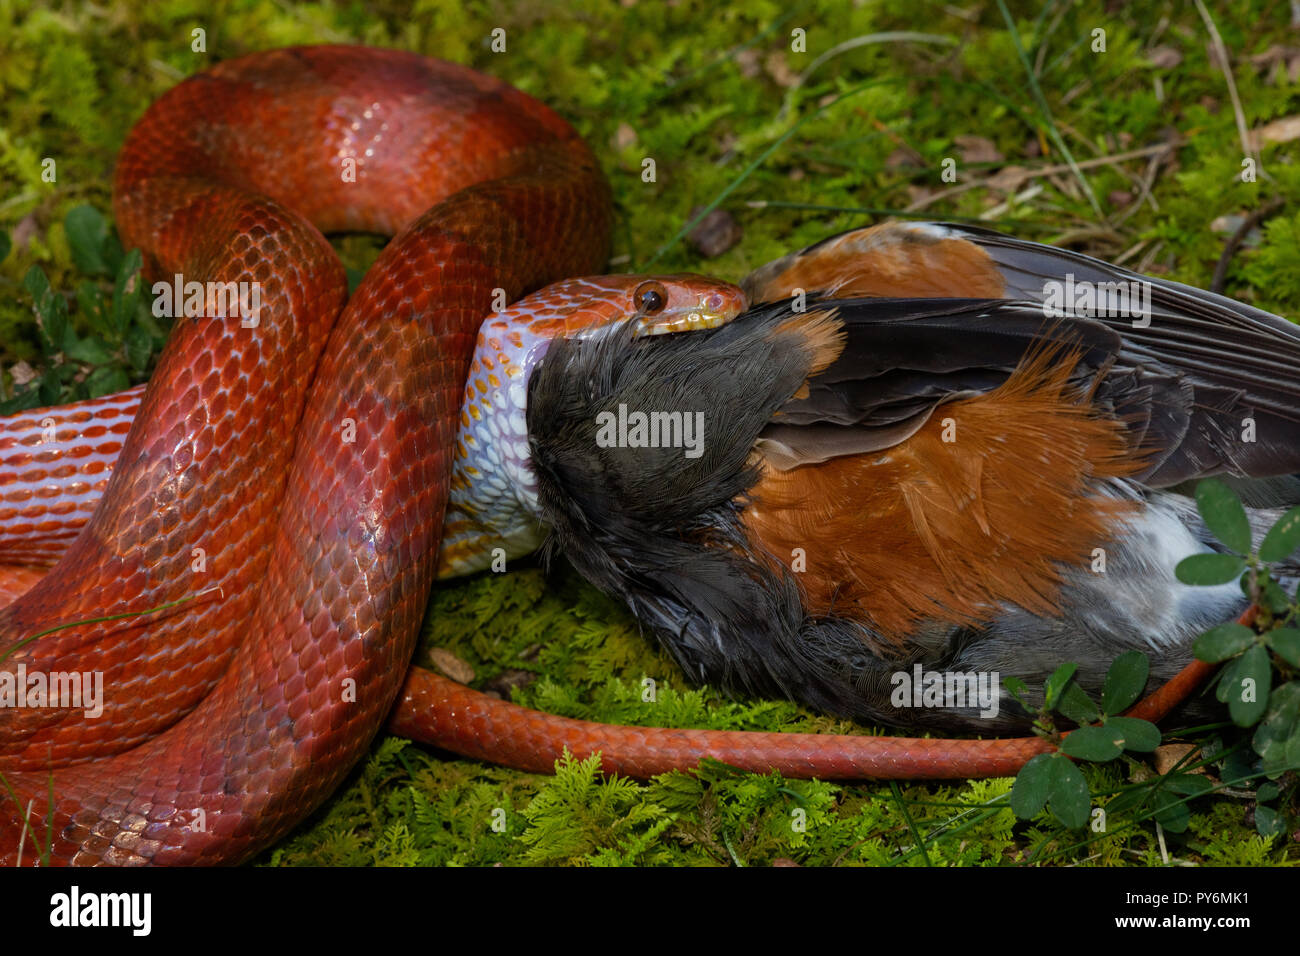 Corn snake, Pantherophis guttatus, attempting to eat American robin, snake captive robin found dead and offered to snake, Maryland Stock Photo